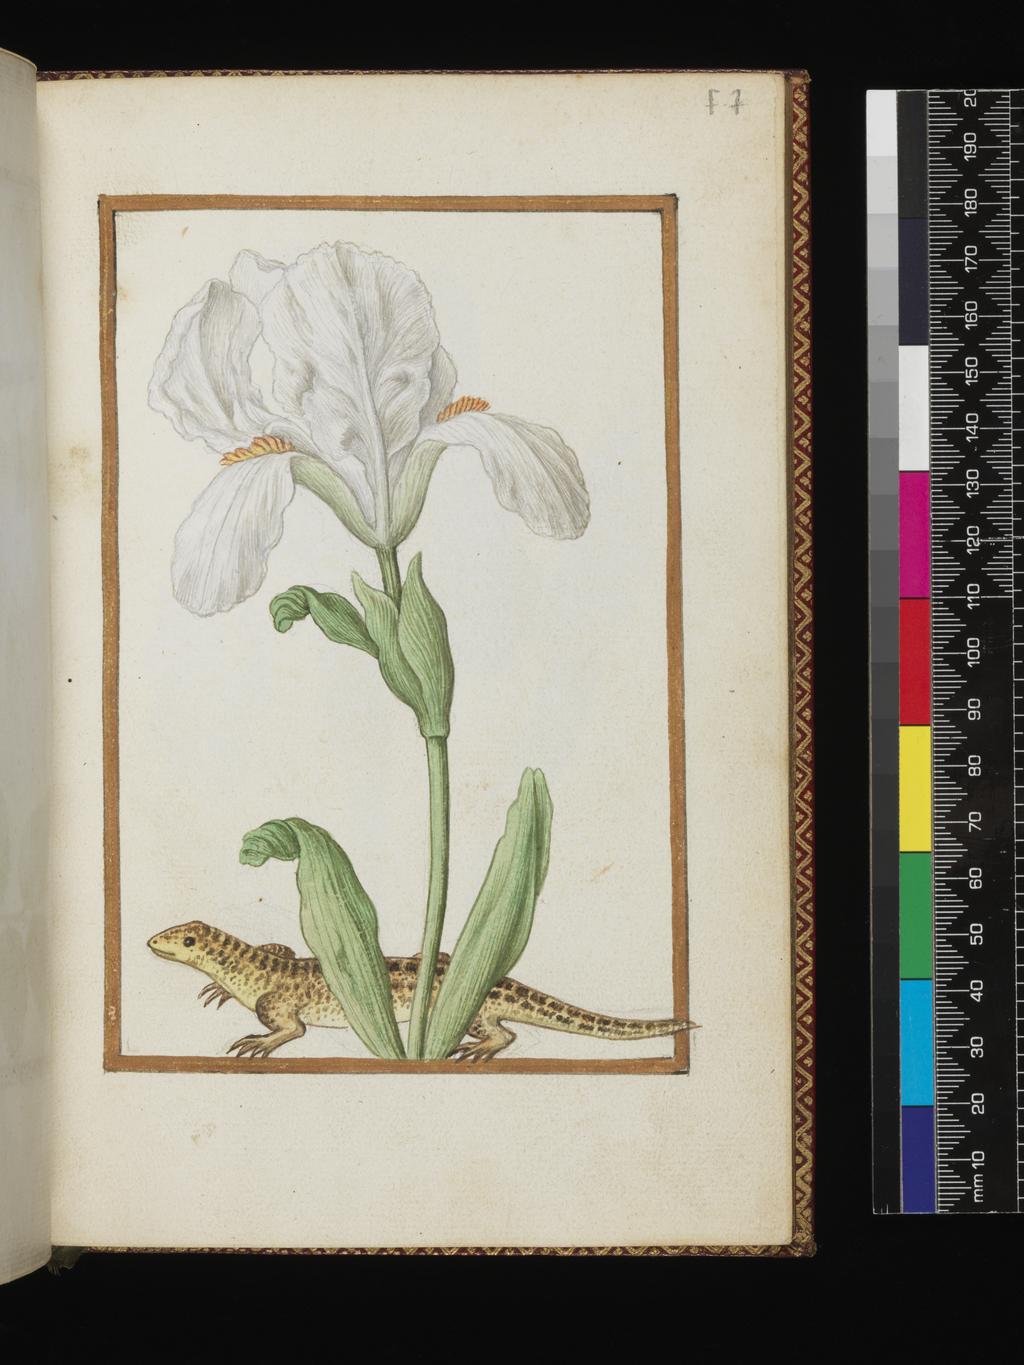 An image of Iris xiphioides[?] White Iris with a salamander. Album containing a dedicatory sonnet and 48 drawings. Pinet, Antoine du (French, op. c. 1584). Each of the drawings is framed by a border of gold paint of varying size according to the depth of the painted area. The drawings on white laid paper, watermarked with a bunch of grapes are bound into an album with a contemporary gold-tooled limp vellum cover bearing the arms, recto and verso of Louise of Lorraine (1553-1601). This, in turn, is bound into an eighteenth century French red morocco gilt binding. The spine is lettered in gold (see 'inscriptions/marks'). Each of the drawings is framed by a border of gold paint of varying size according to the depth of the painted area. Blank ff not detailed elsewhere. Height, sheet size, 204 mm, width, sheet size, 139 mm.